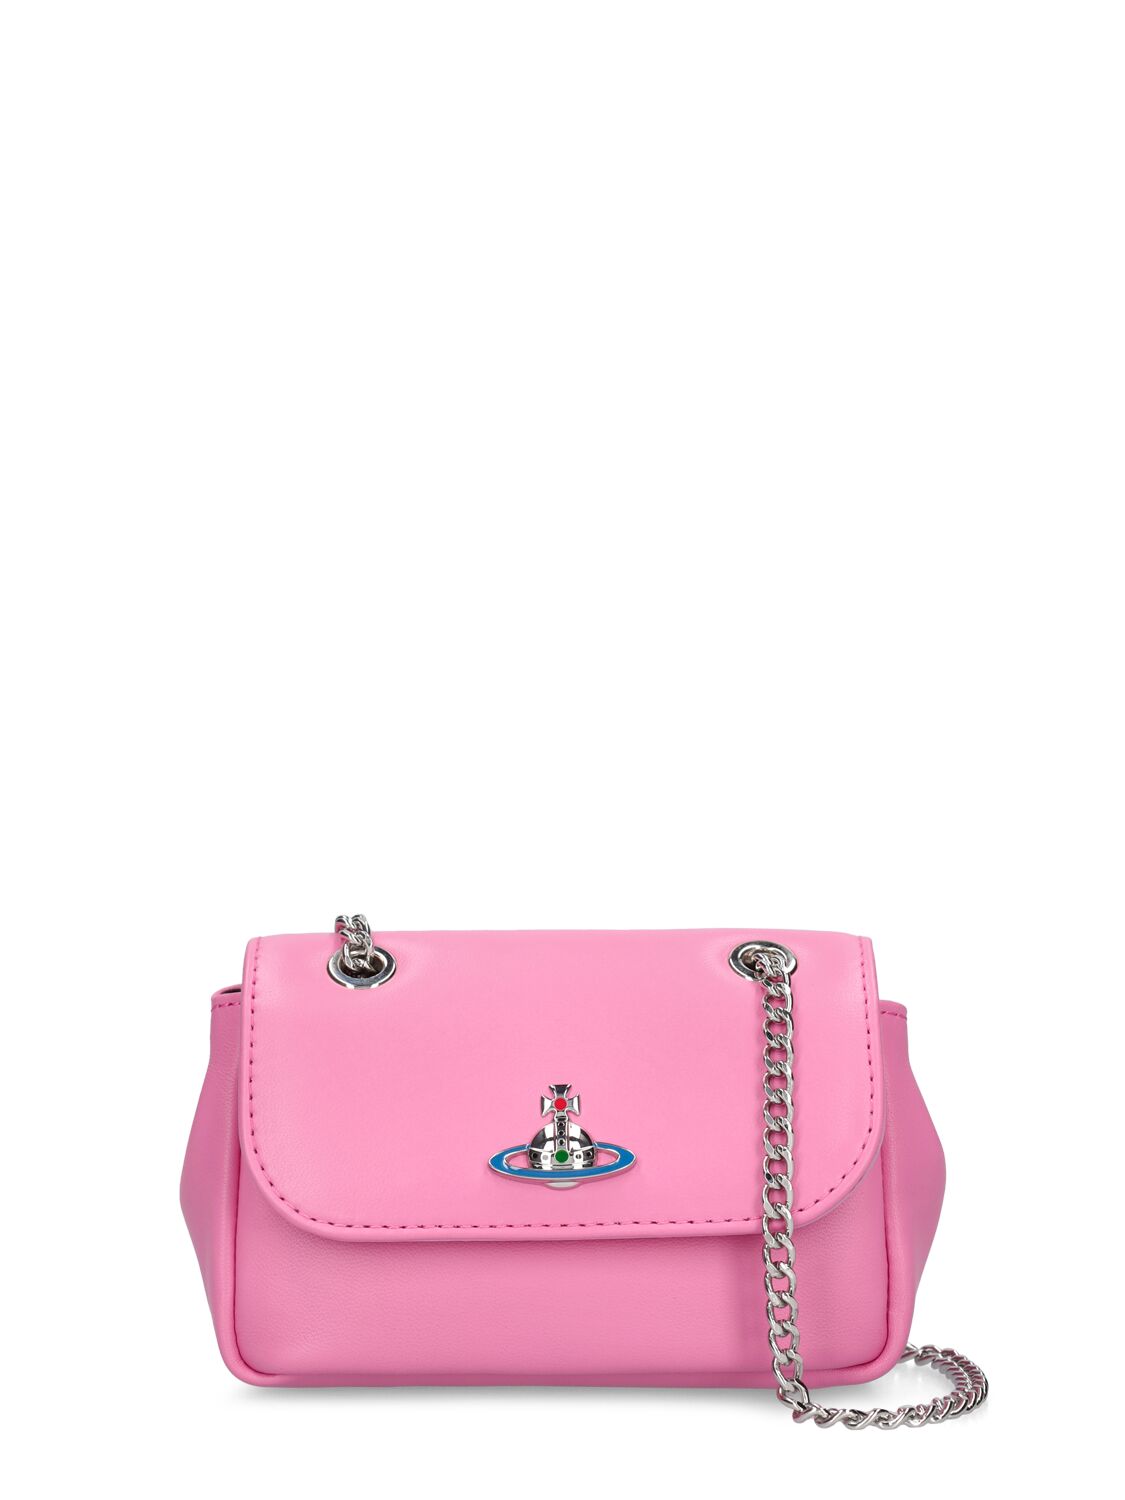 Vivienne Westwood Small Leather Shoulder Bag W/chain In Pink